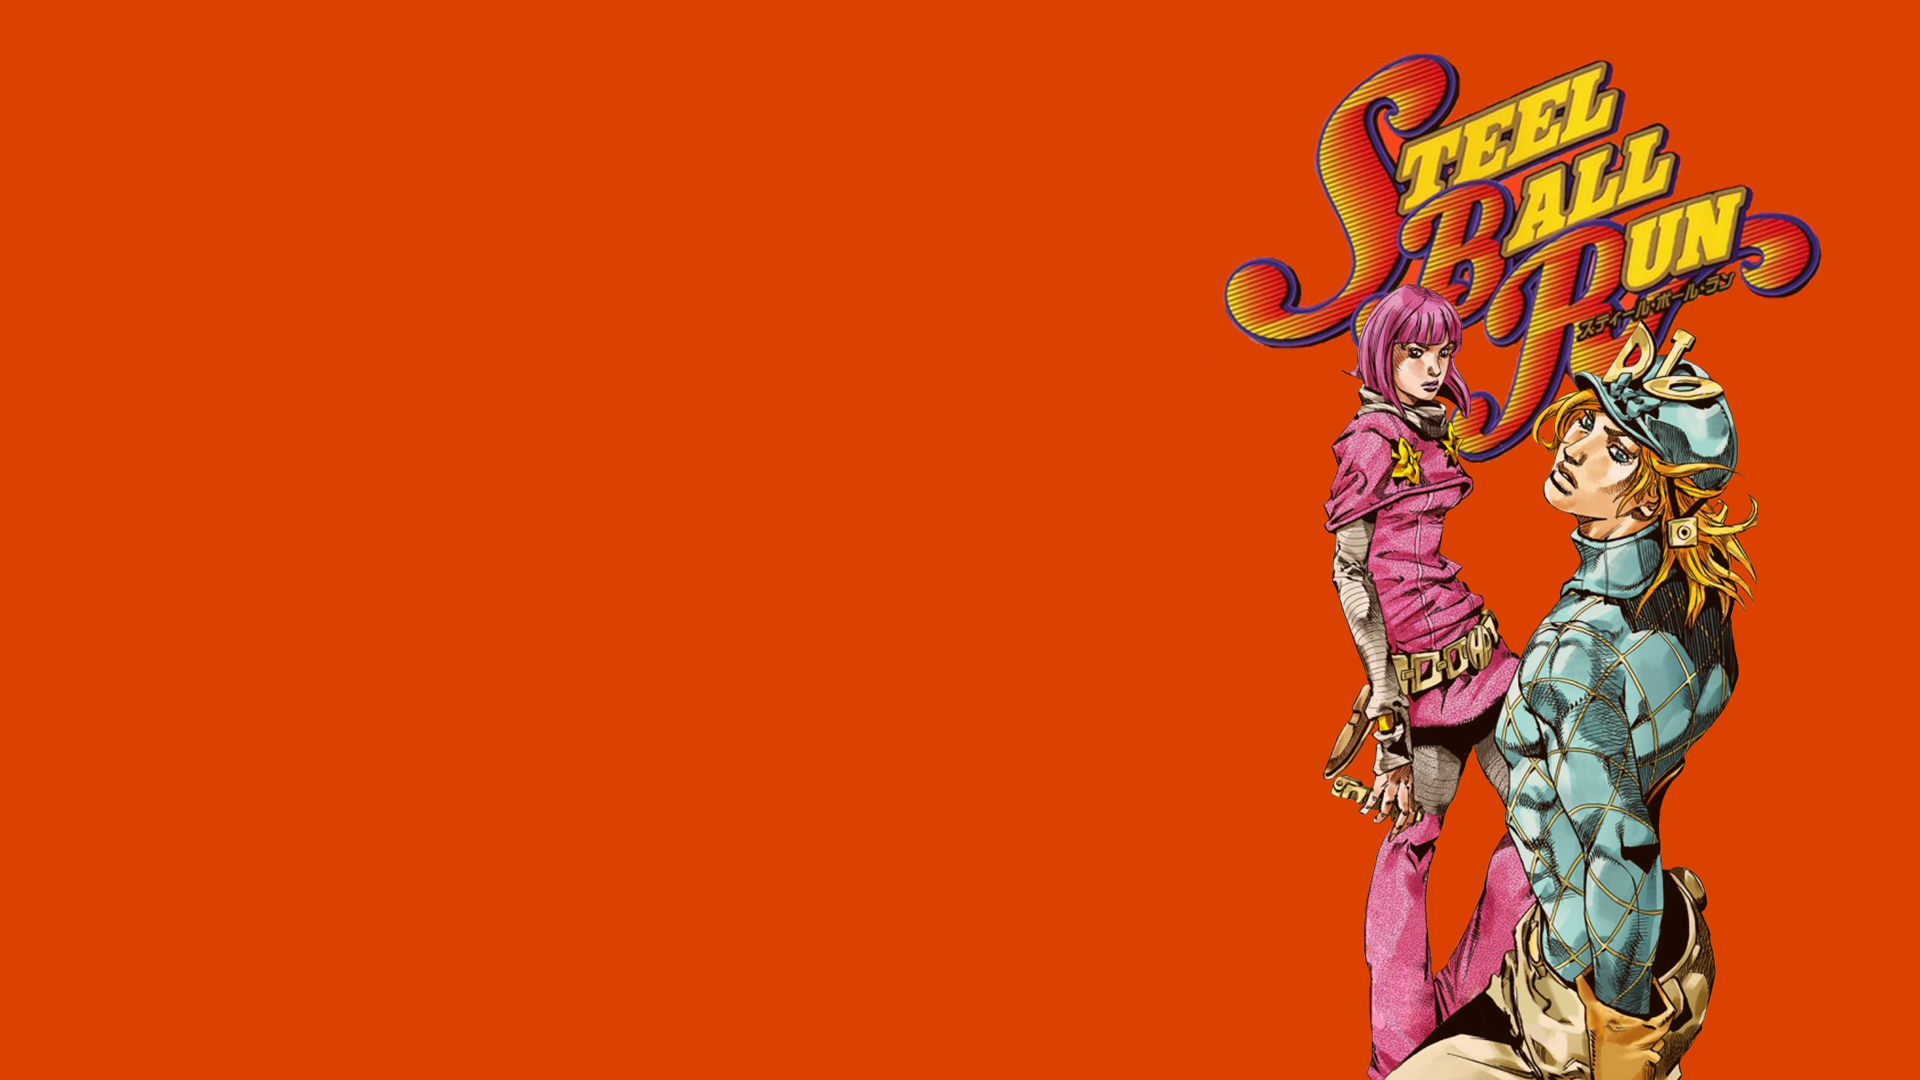 Just finished the amazing part 7. Decided to make a simple wallpaper! : r/StardustCrusaders